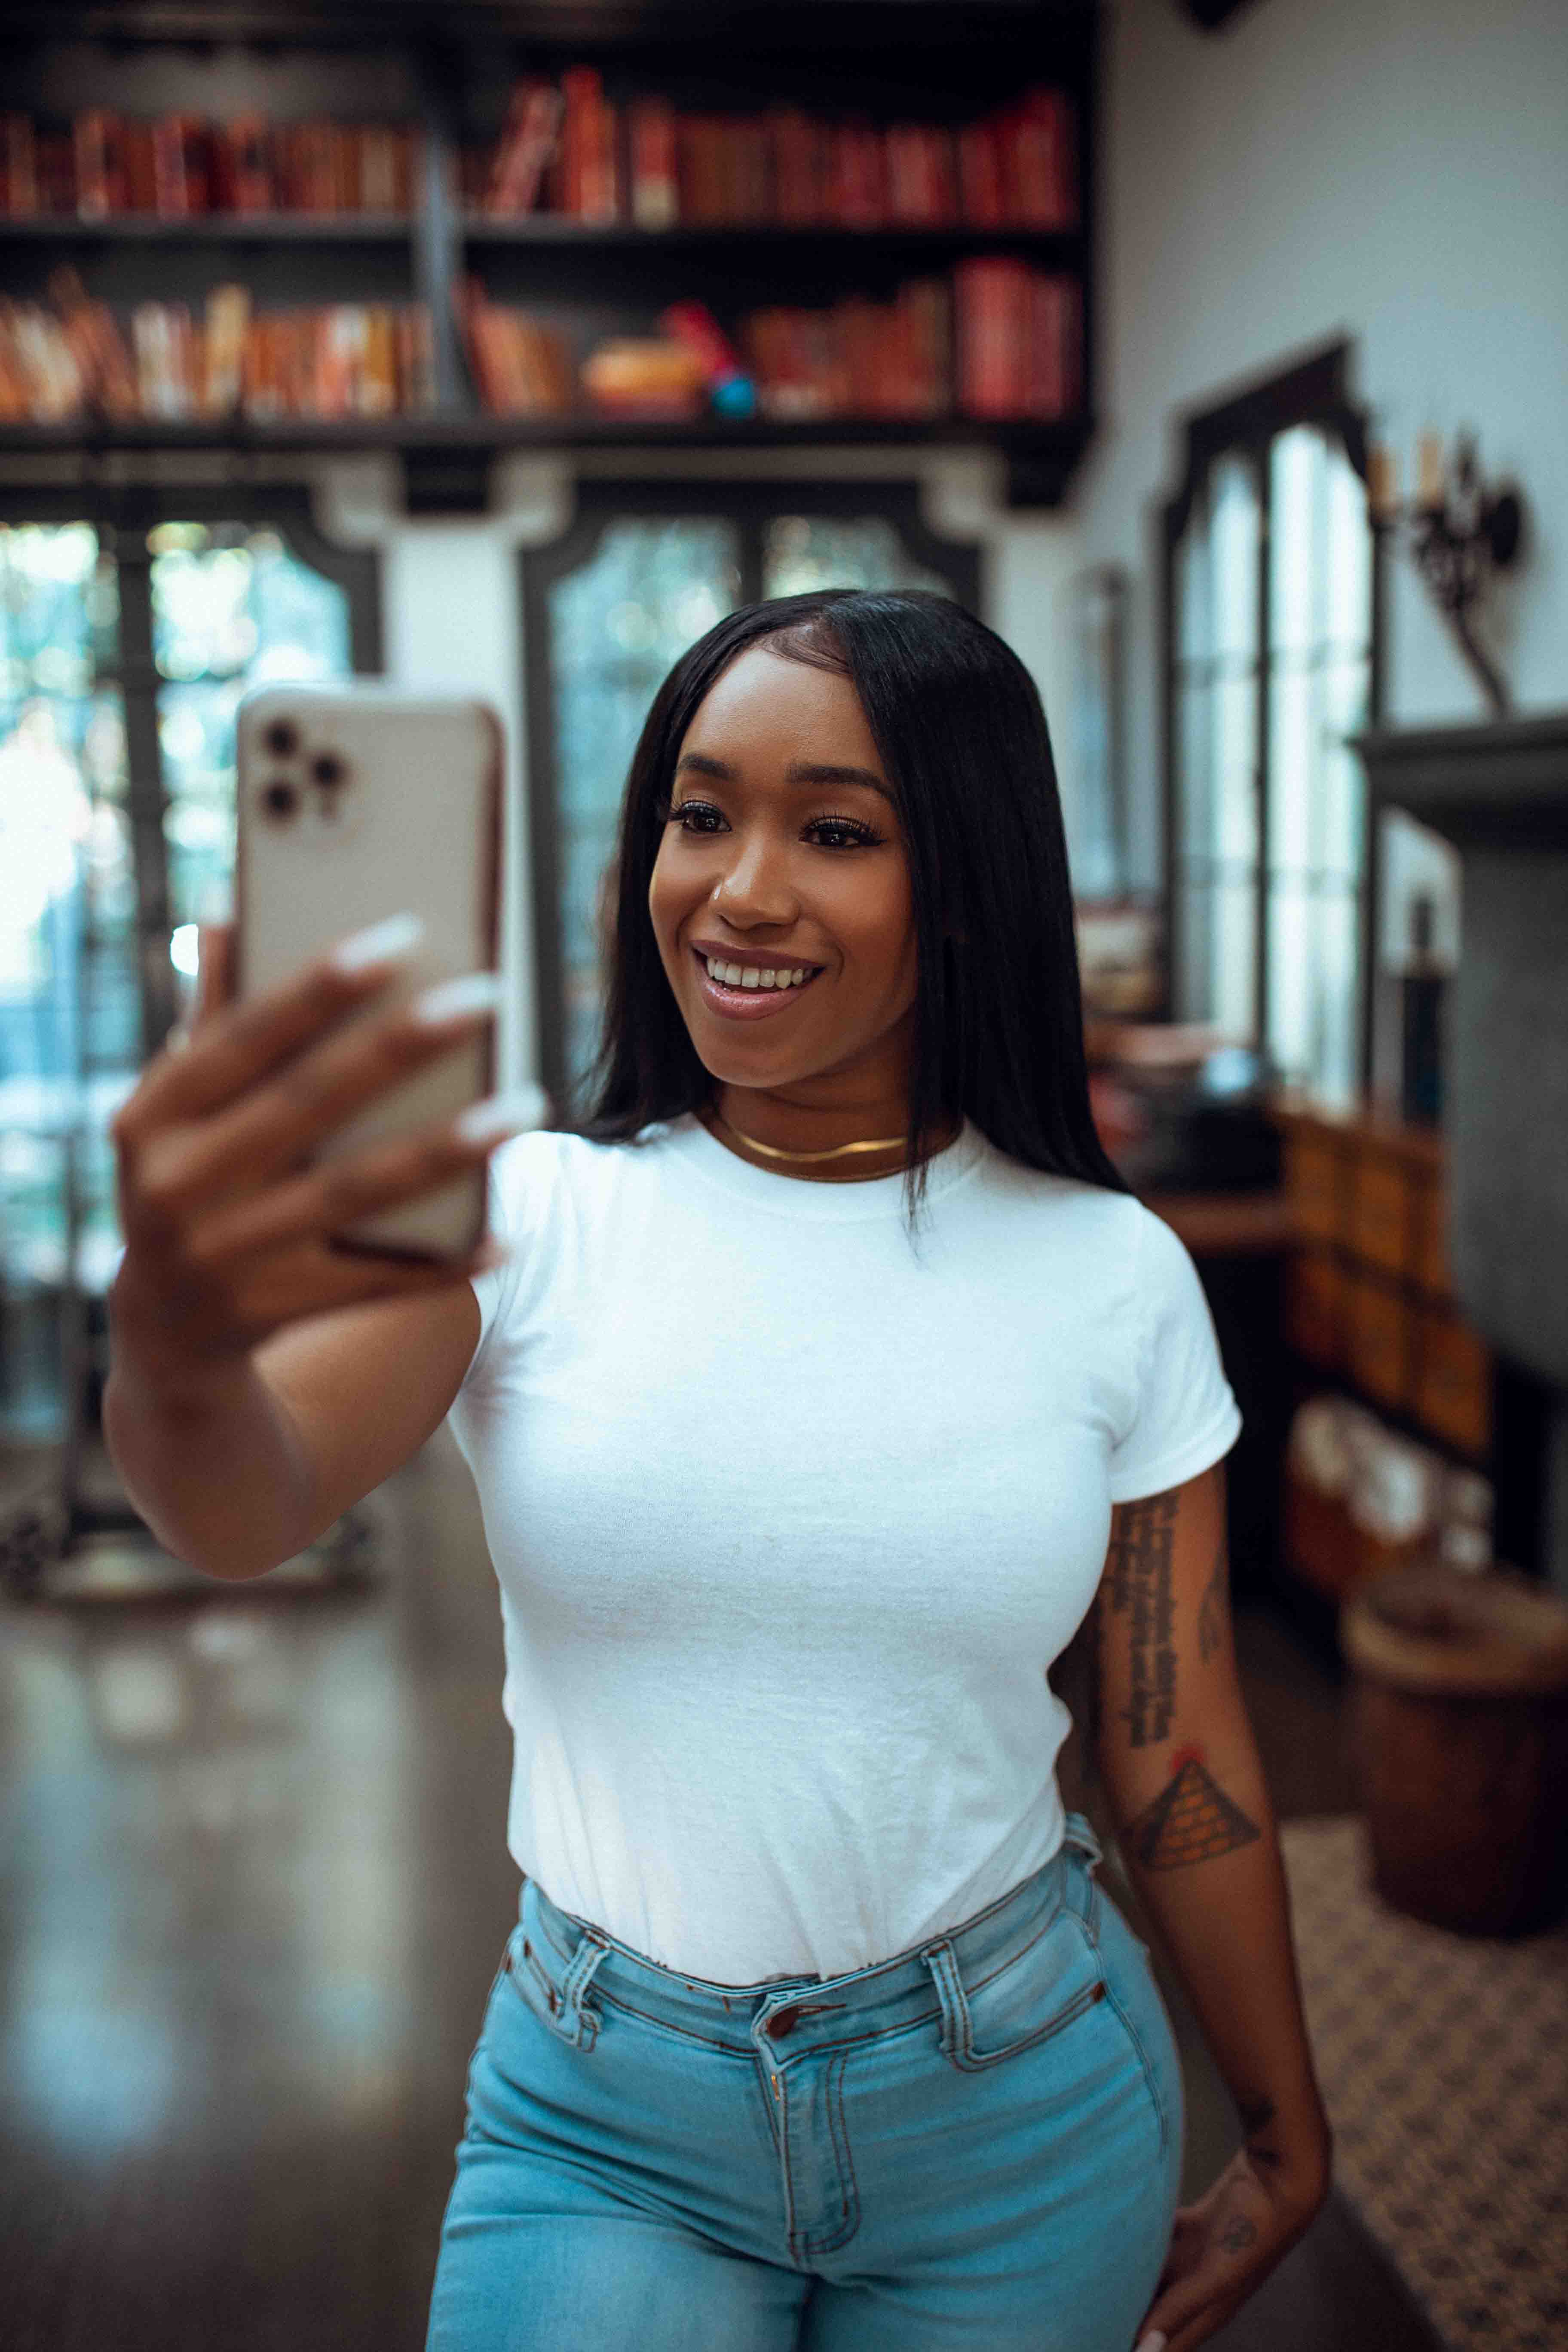 woman with dark, straight, long hair wearing a white t-shirt tucked into skinny light-wash blue jeans posing holding her phone up in front of her to take a photo of herself in front of an old library-like atmosphere